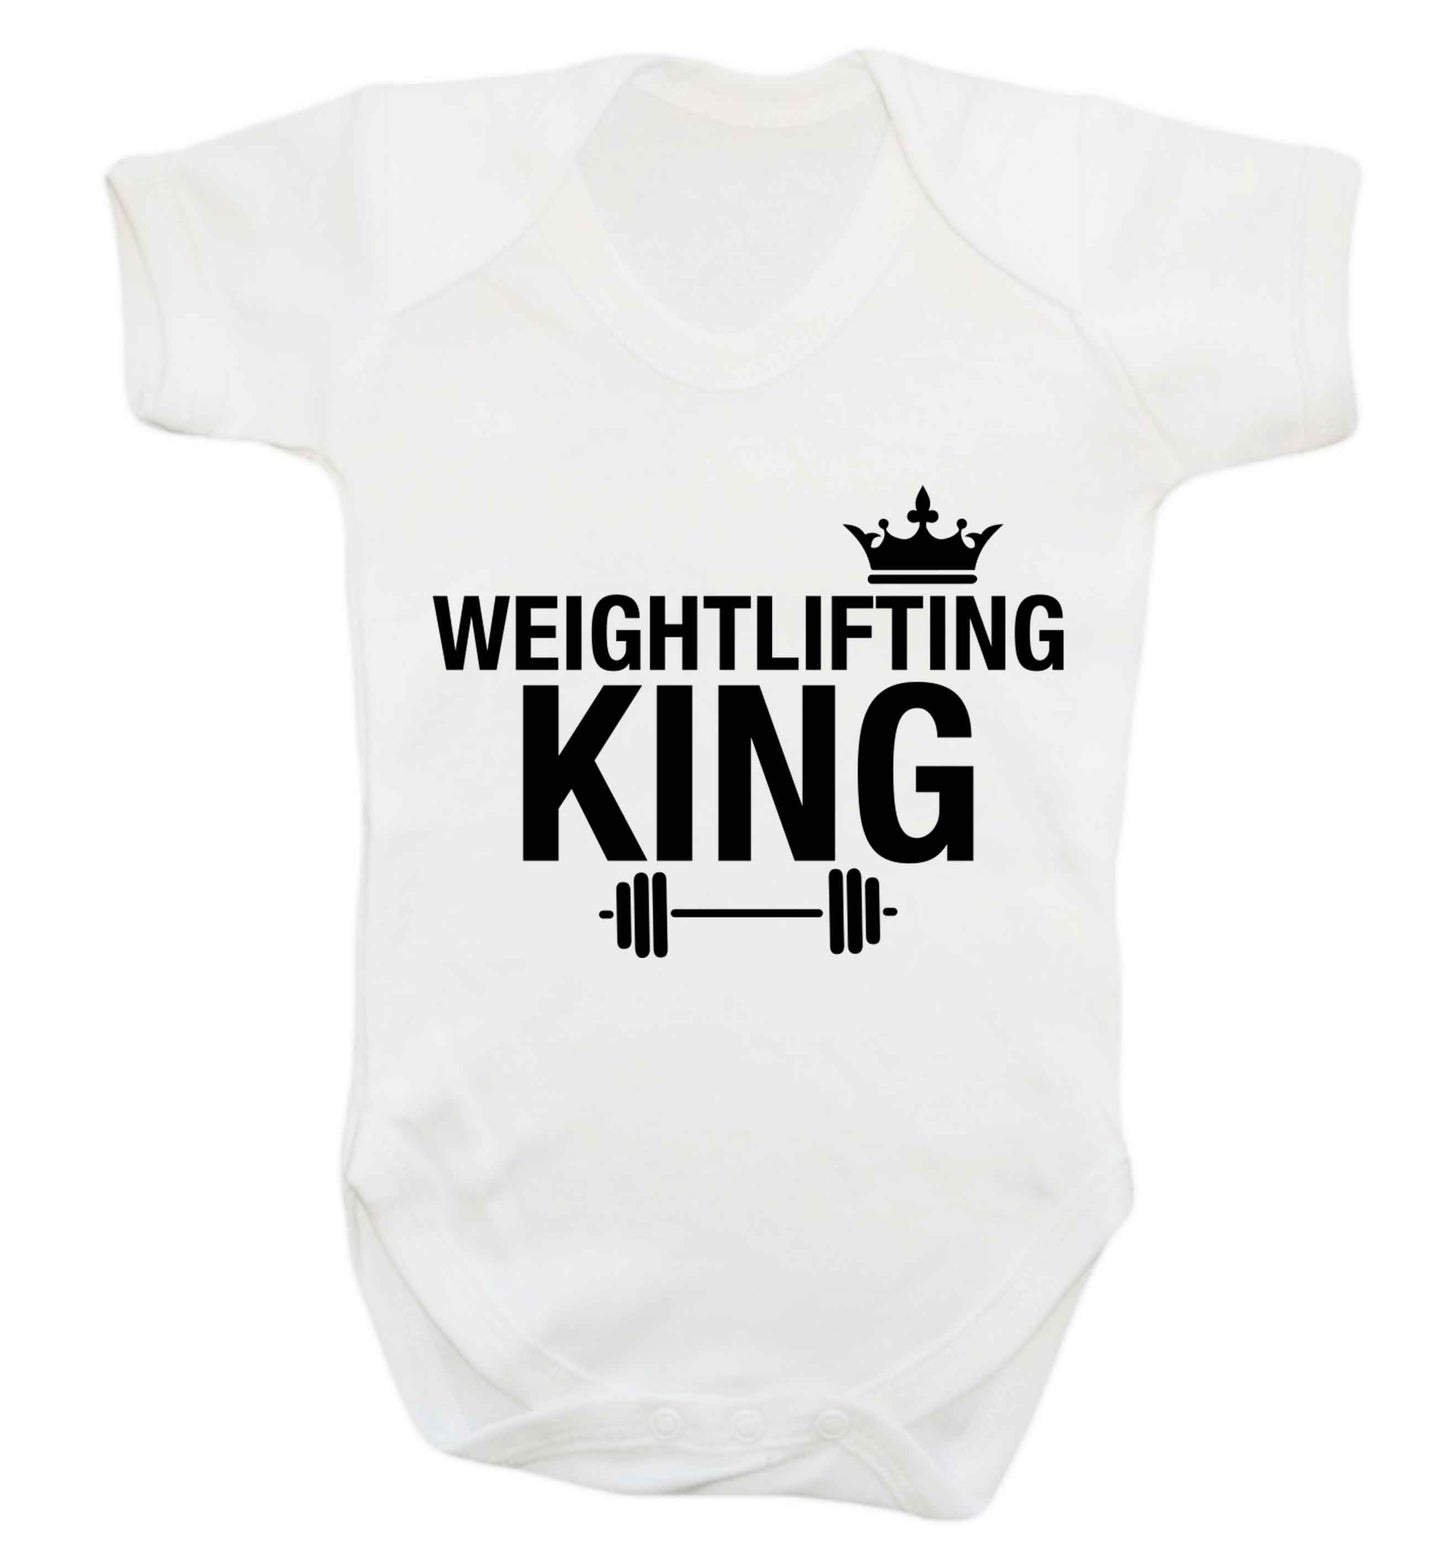 Weightlifting king Baby Vest white 18-24 months